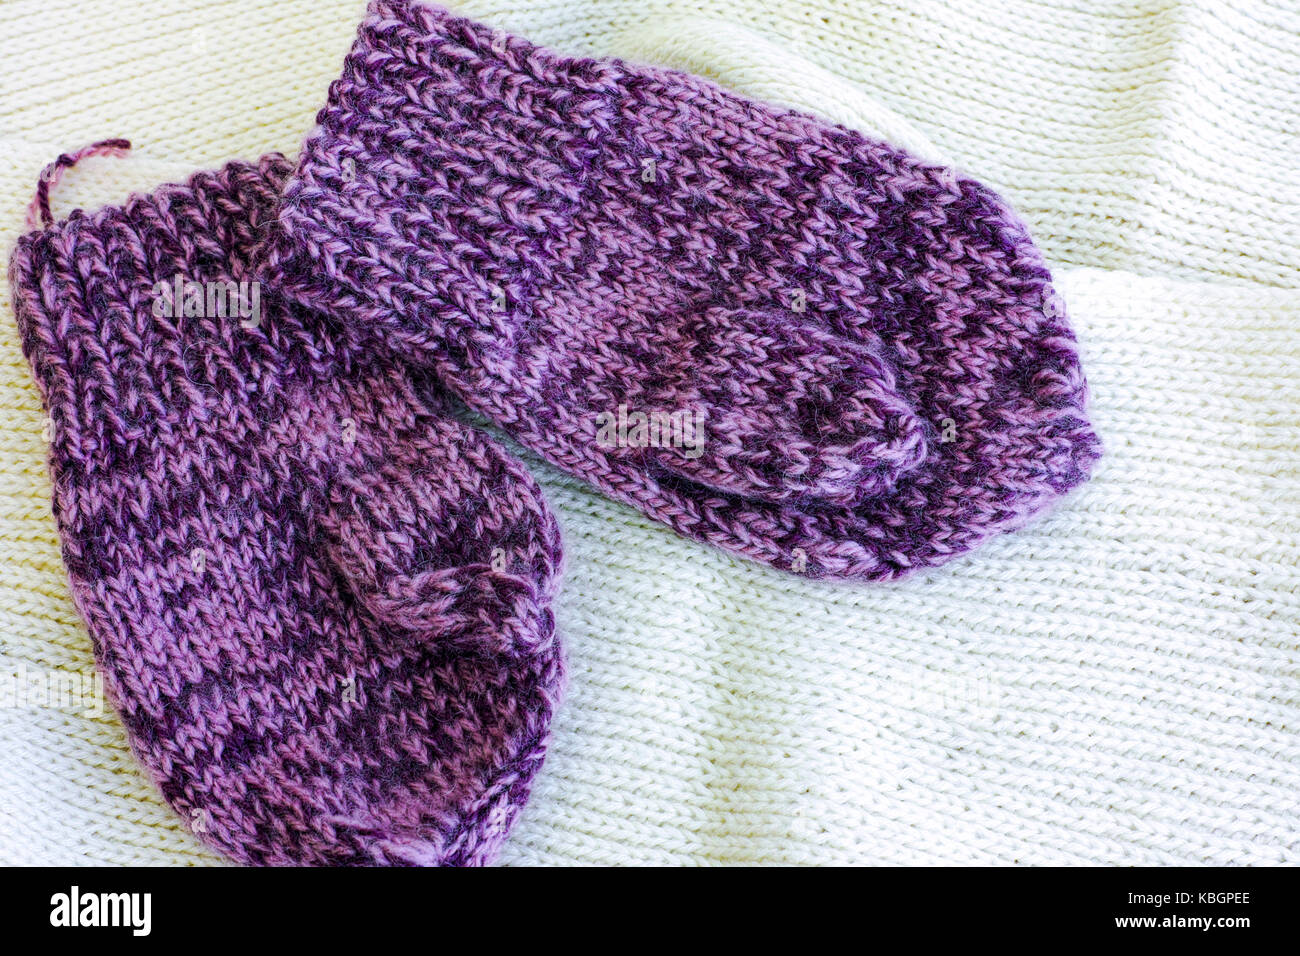 Two purple knitted mittens on white scarf. Stock Photo